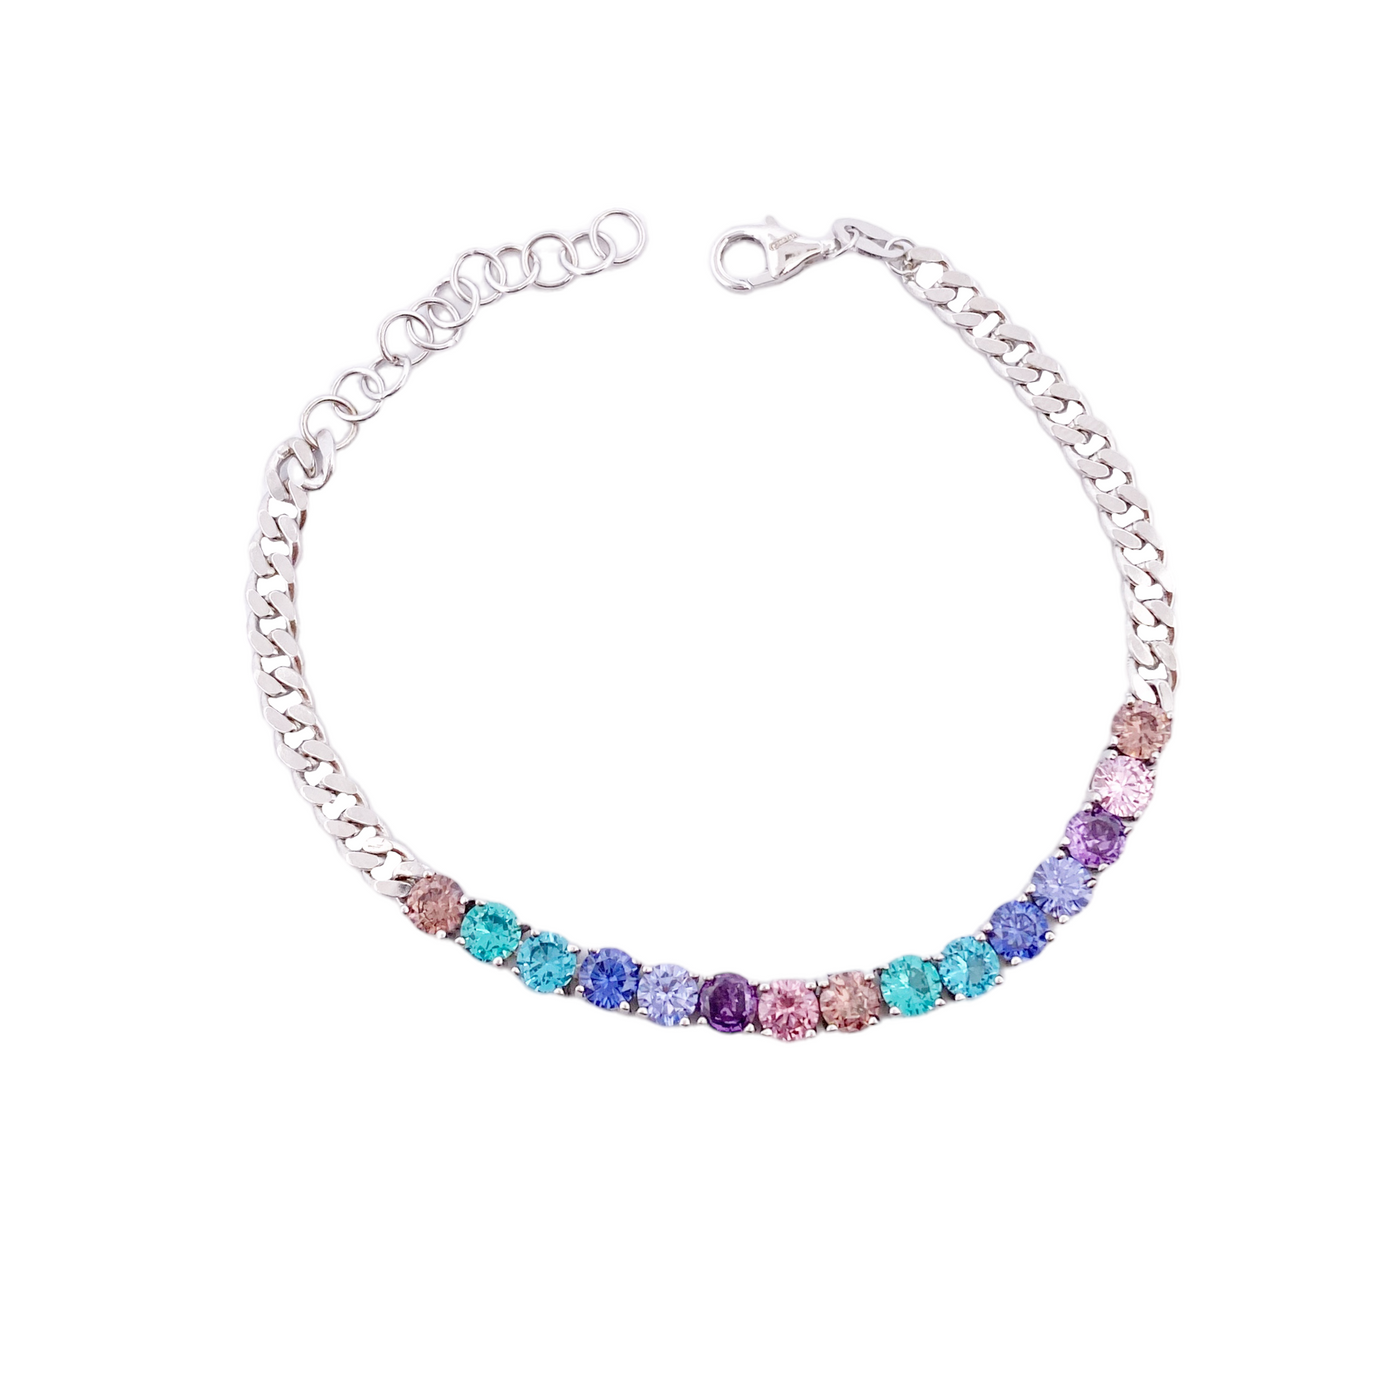 SILVER BRACELET WITH COLORED STONES